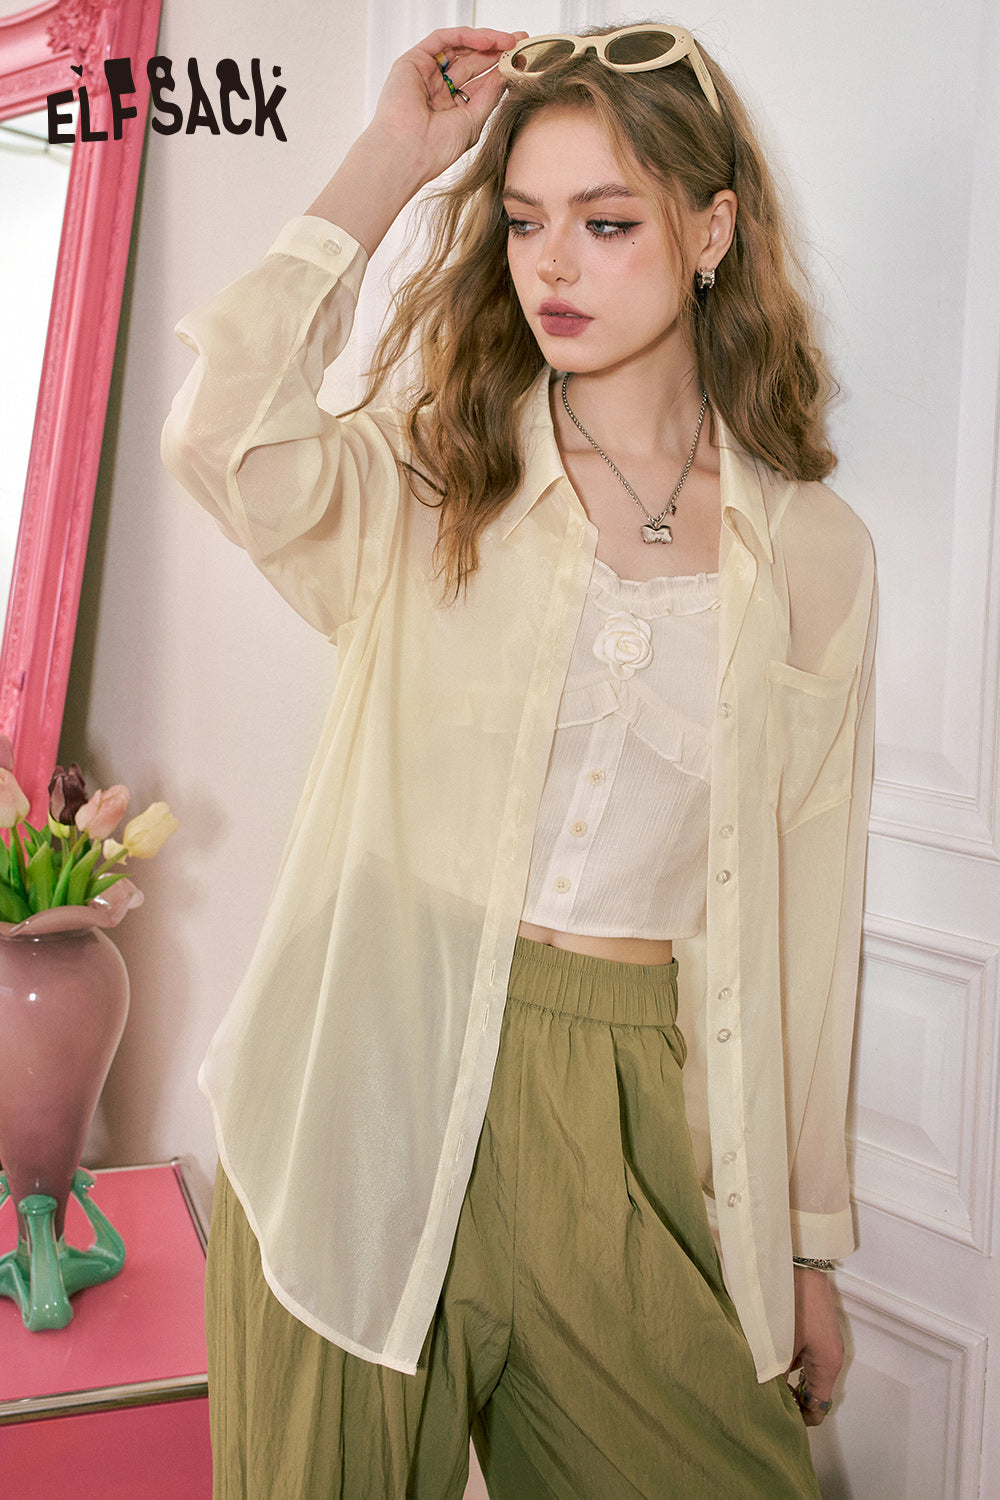 ELFSACK 2024 summer new arrival picnic travel vacation holiday soft comfortable fitted Wooden ear edge strap chiffon shirt two-piece set beautiful sun protection